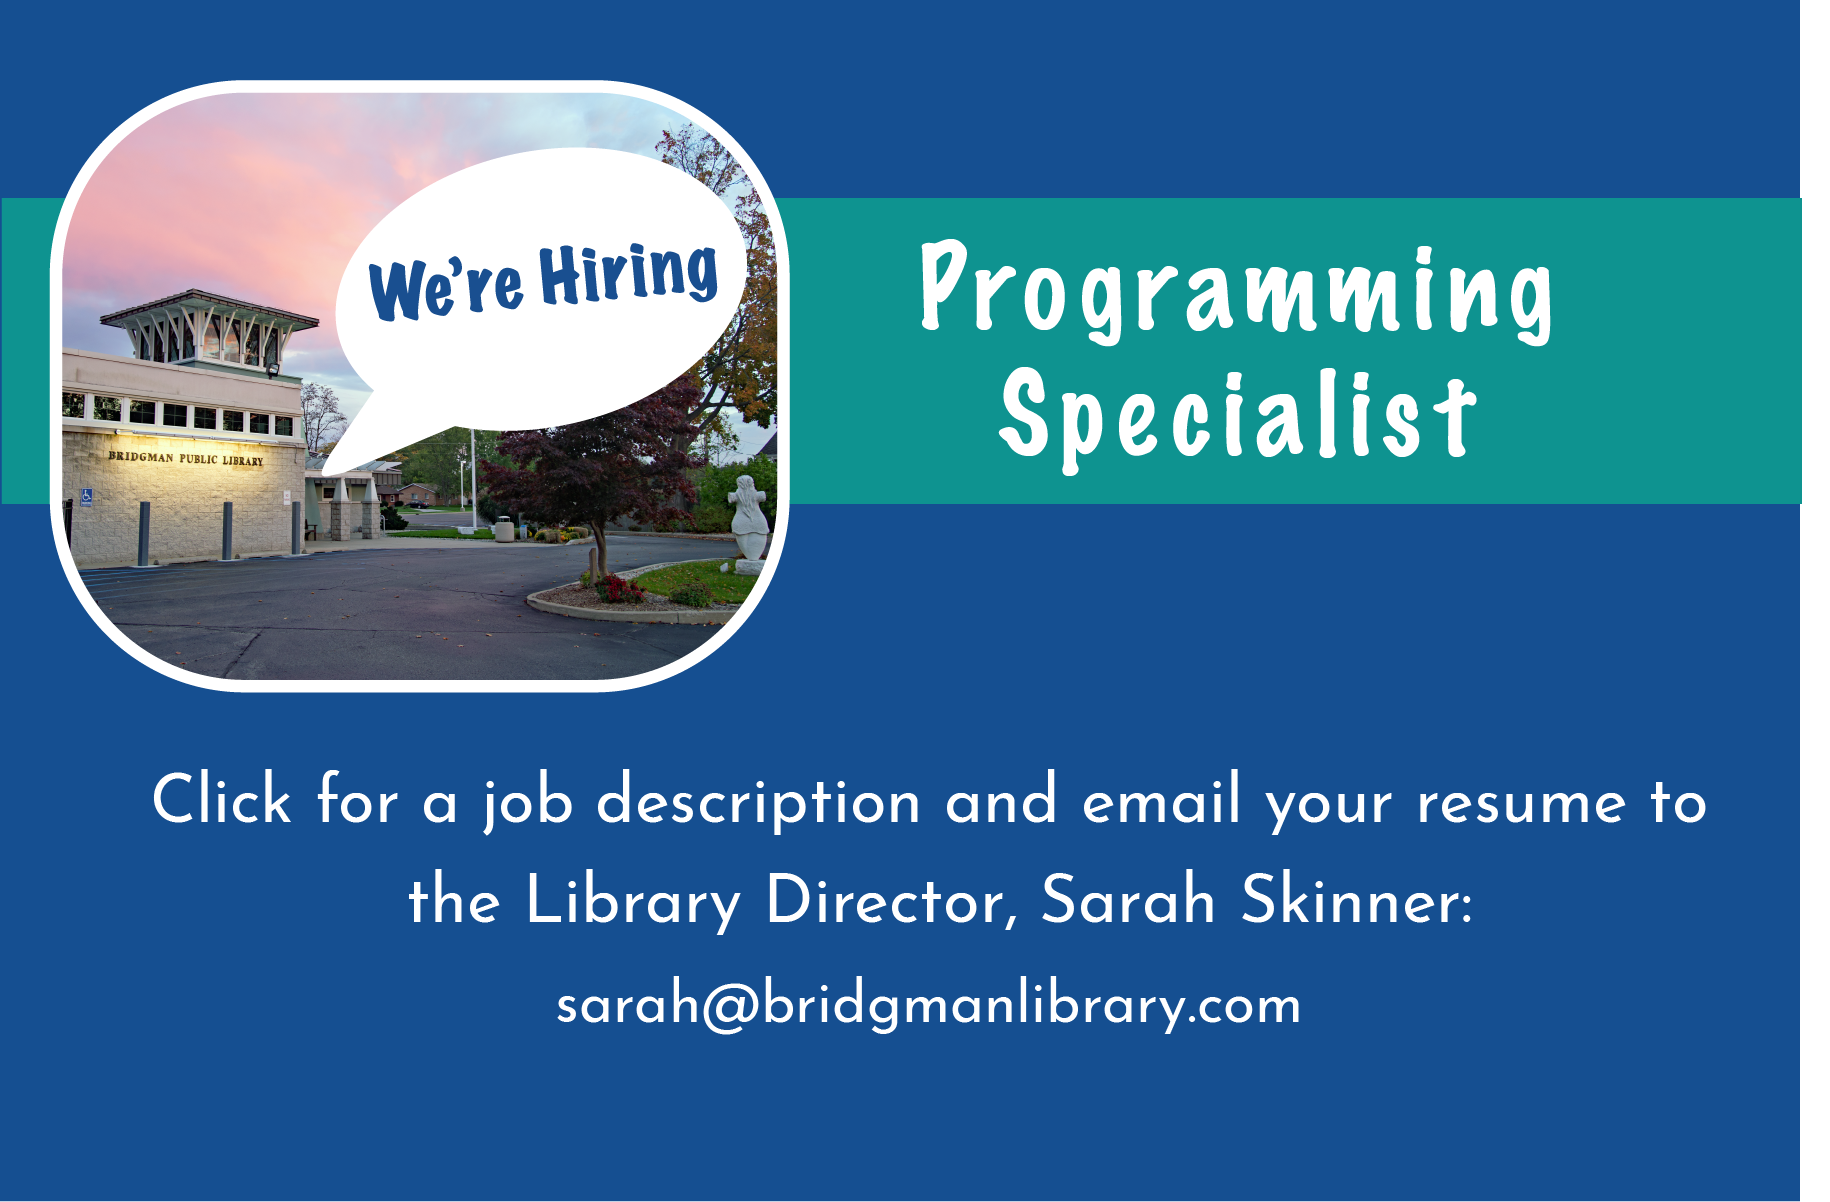 A link to a job description for an opening, Programming Specialist.